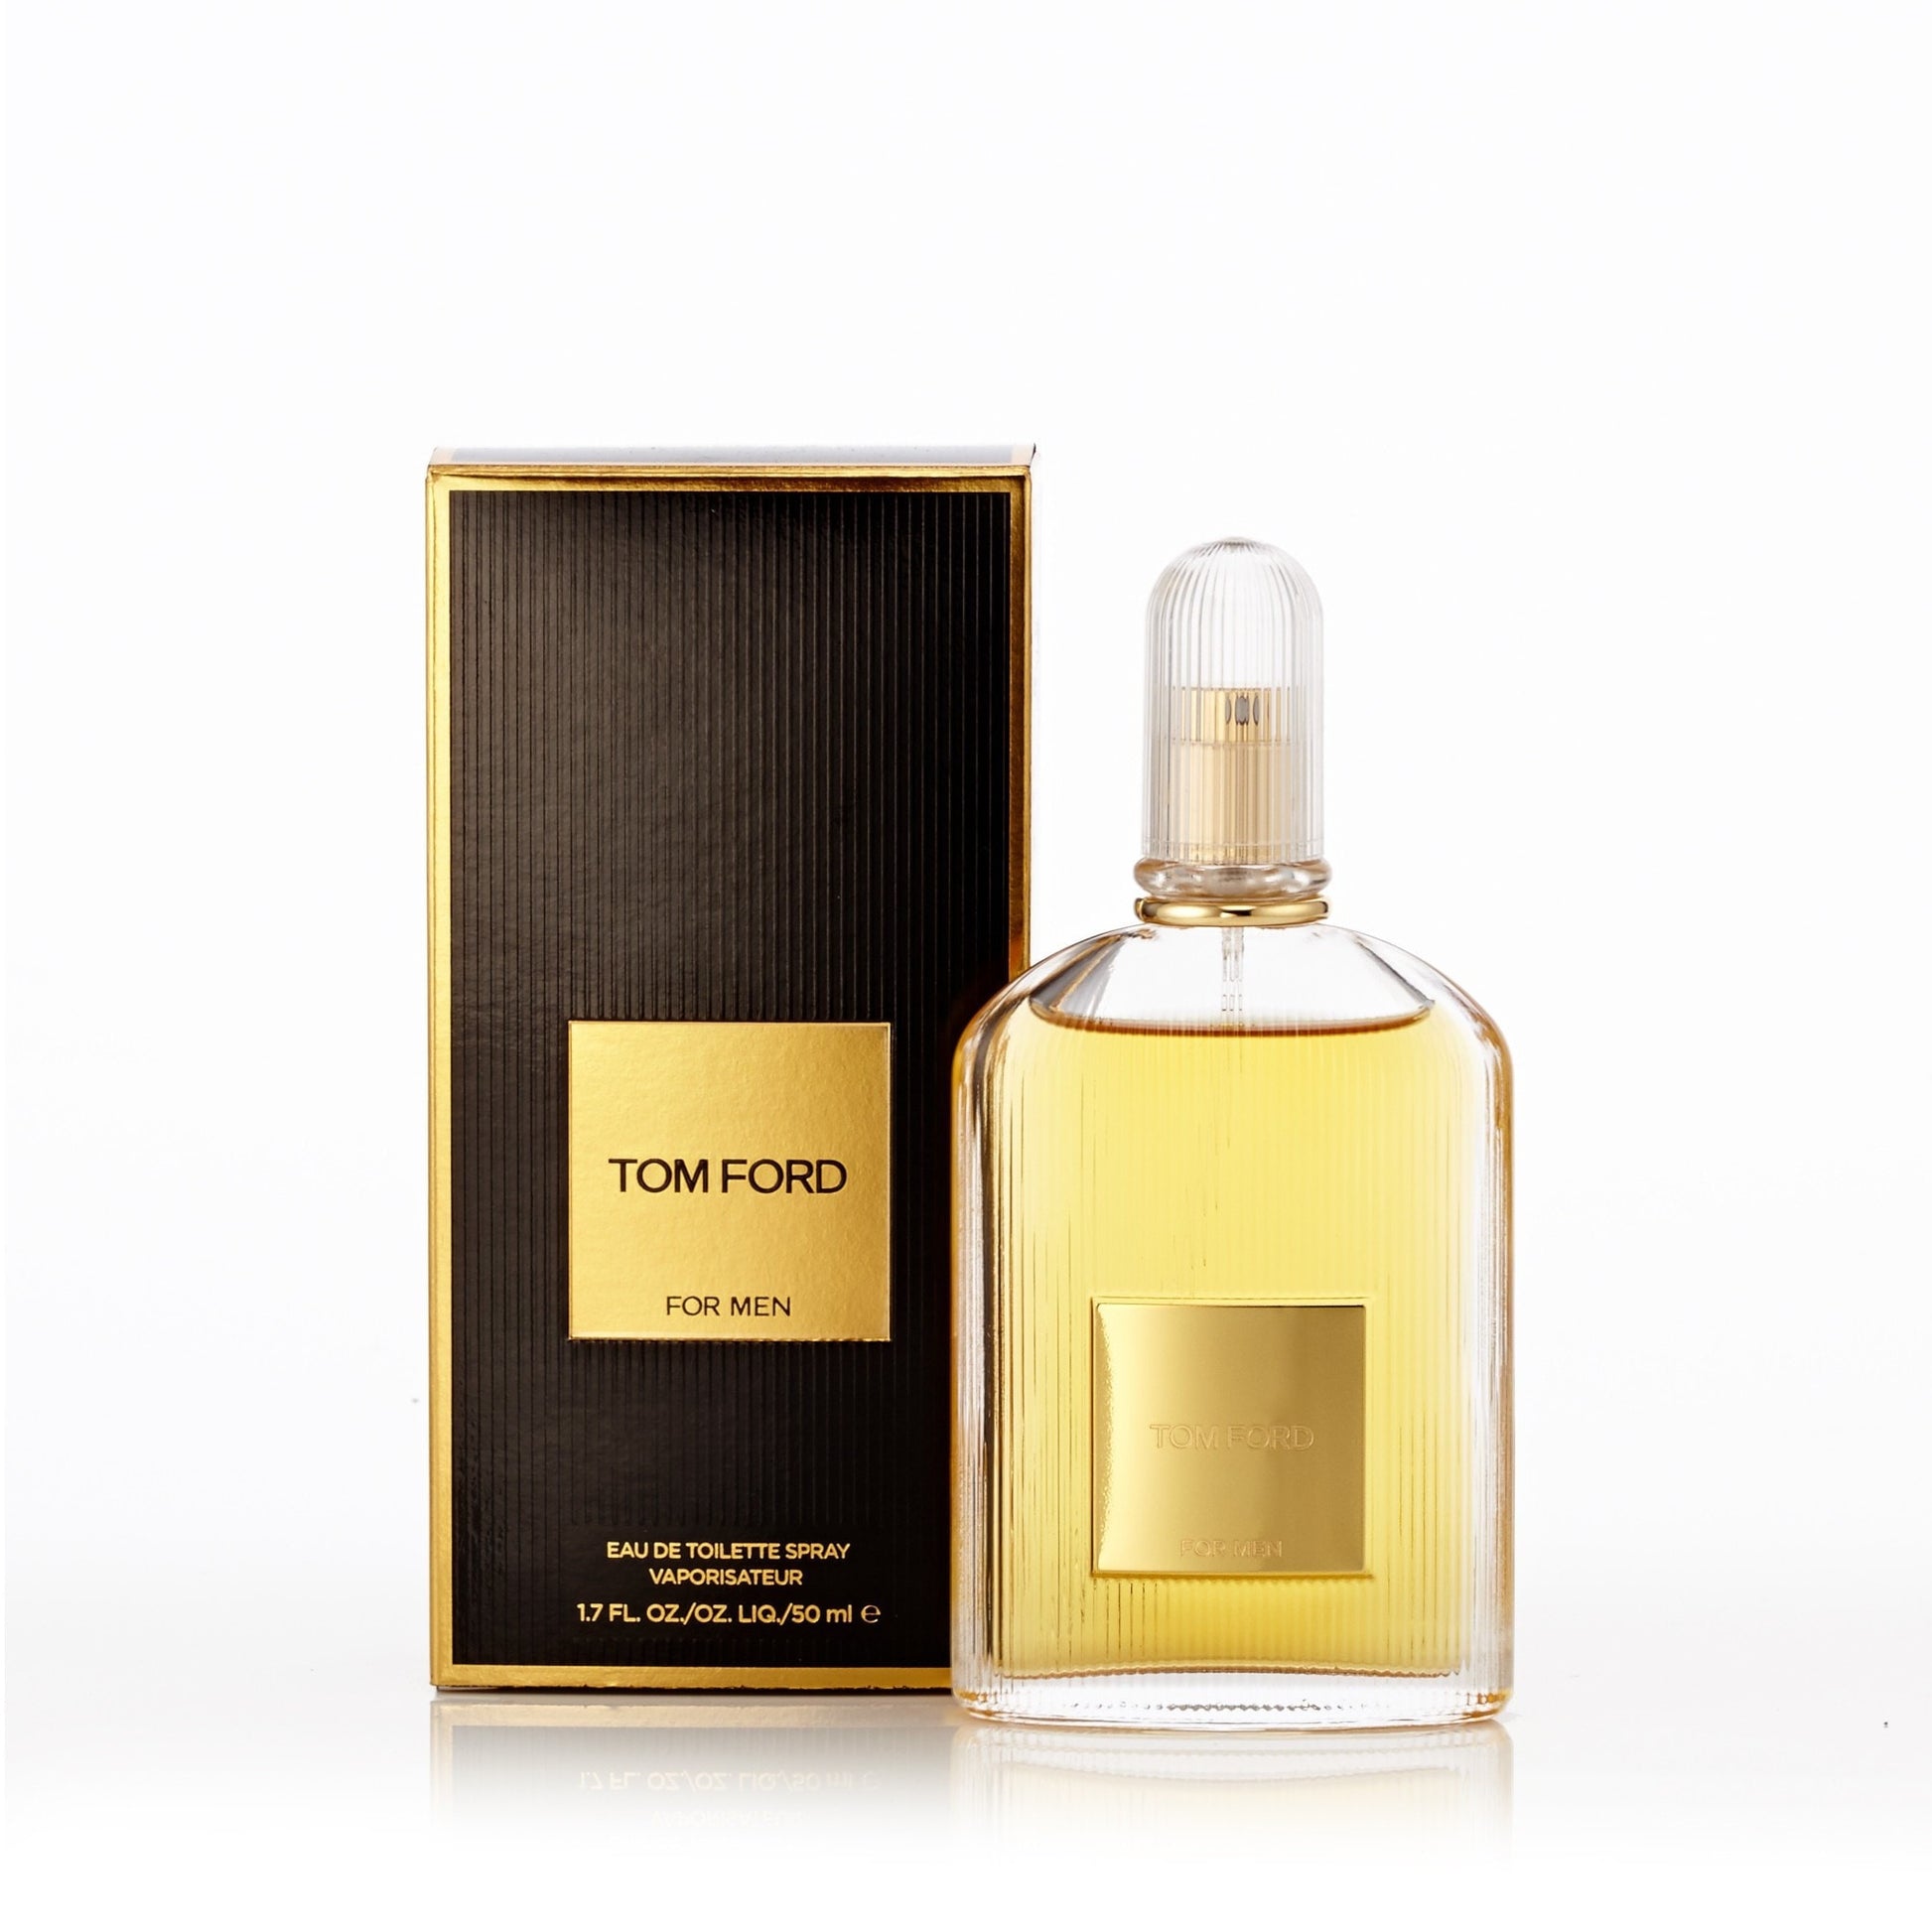 Tom Ford Eau de Toilette Spray for Men by Tom Ford 1.7 oz. Click to open in modal